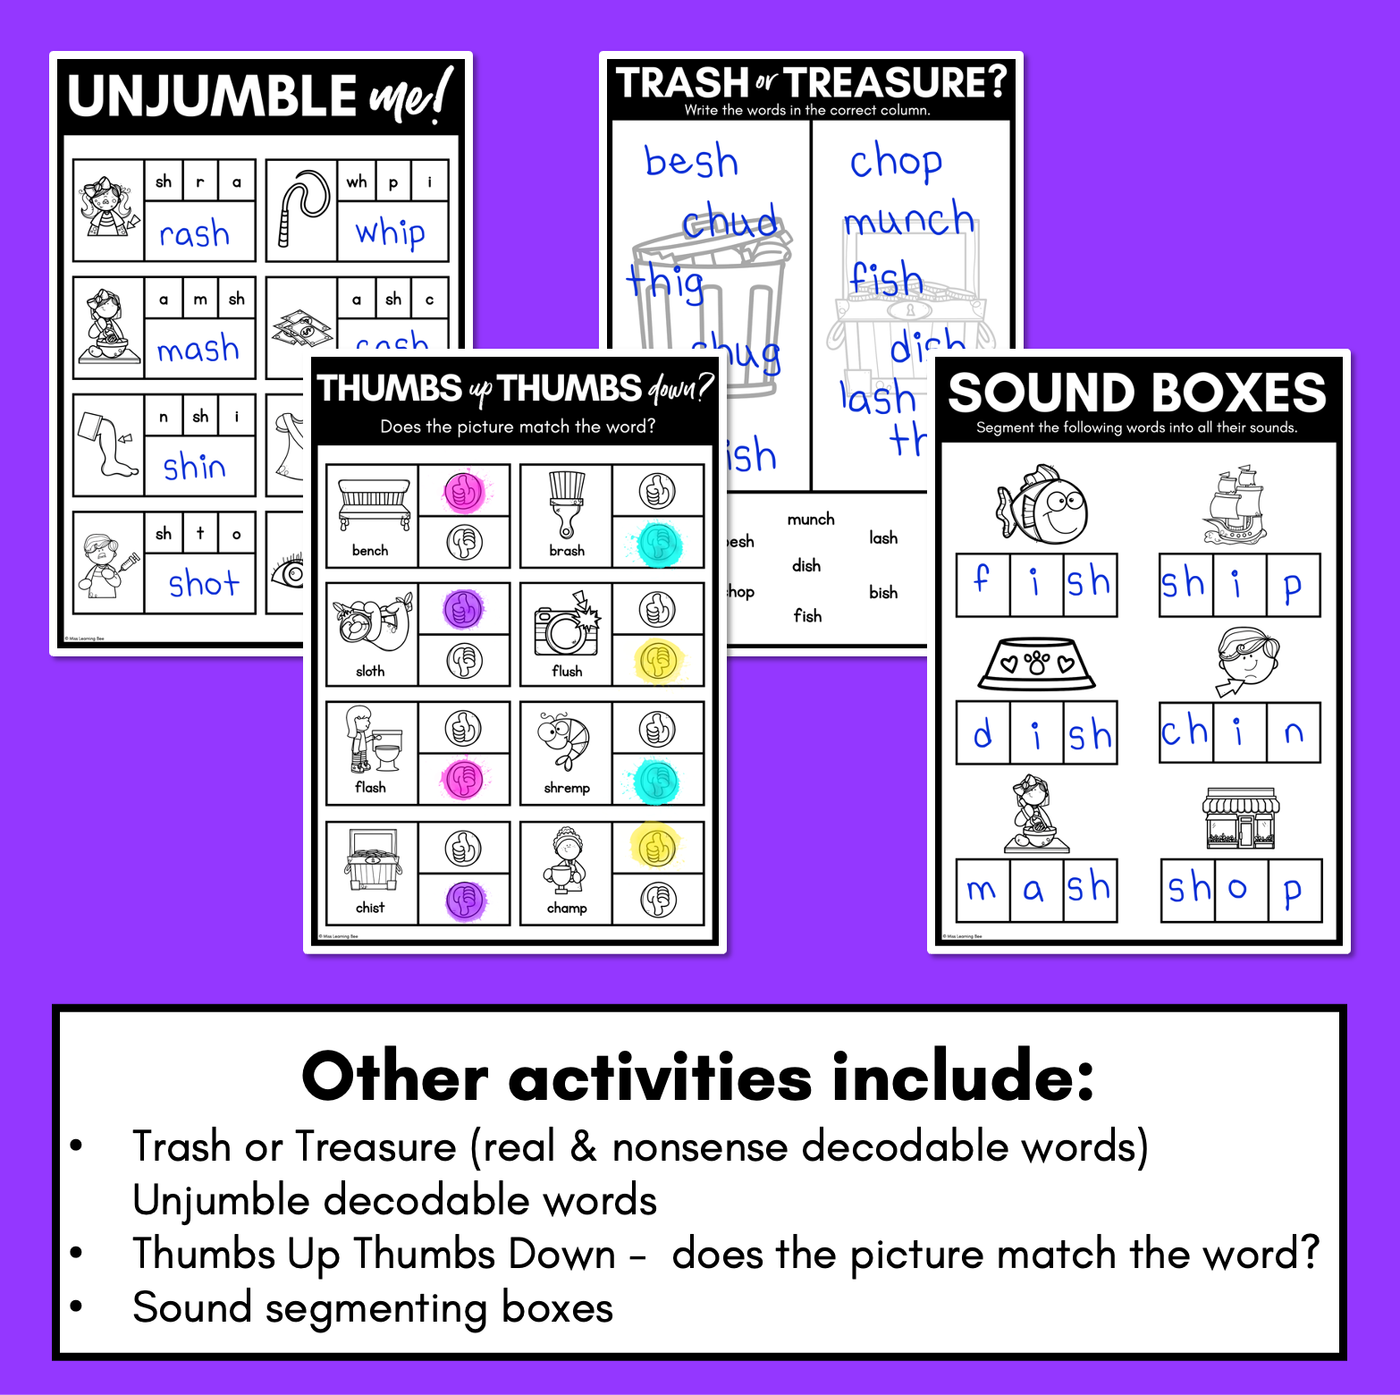 CH SH TH WH Worksheets - PHONICS REVIEW for Consonant Digraphs